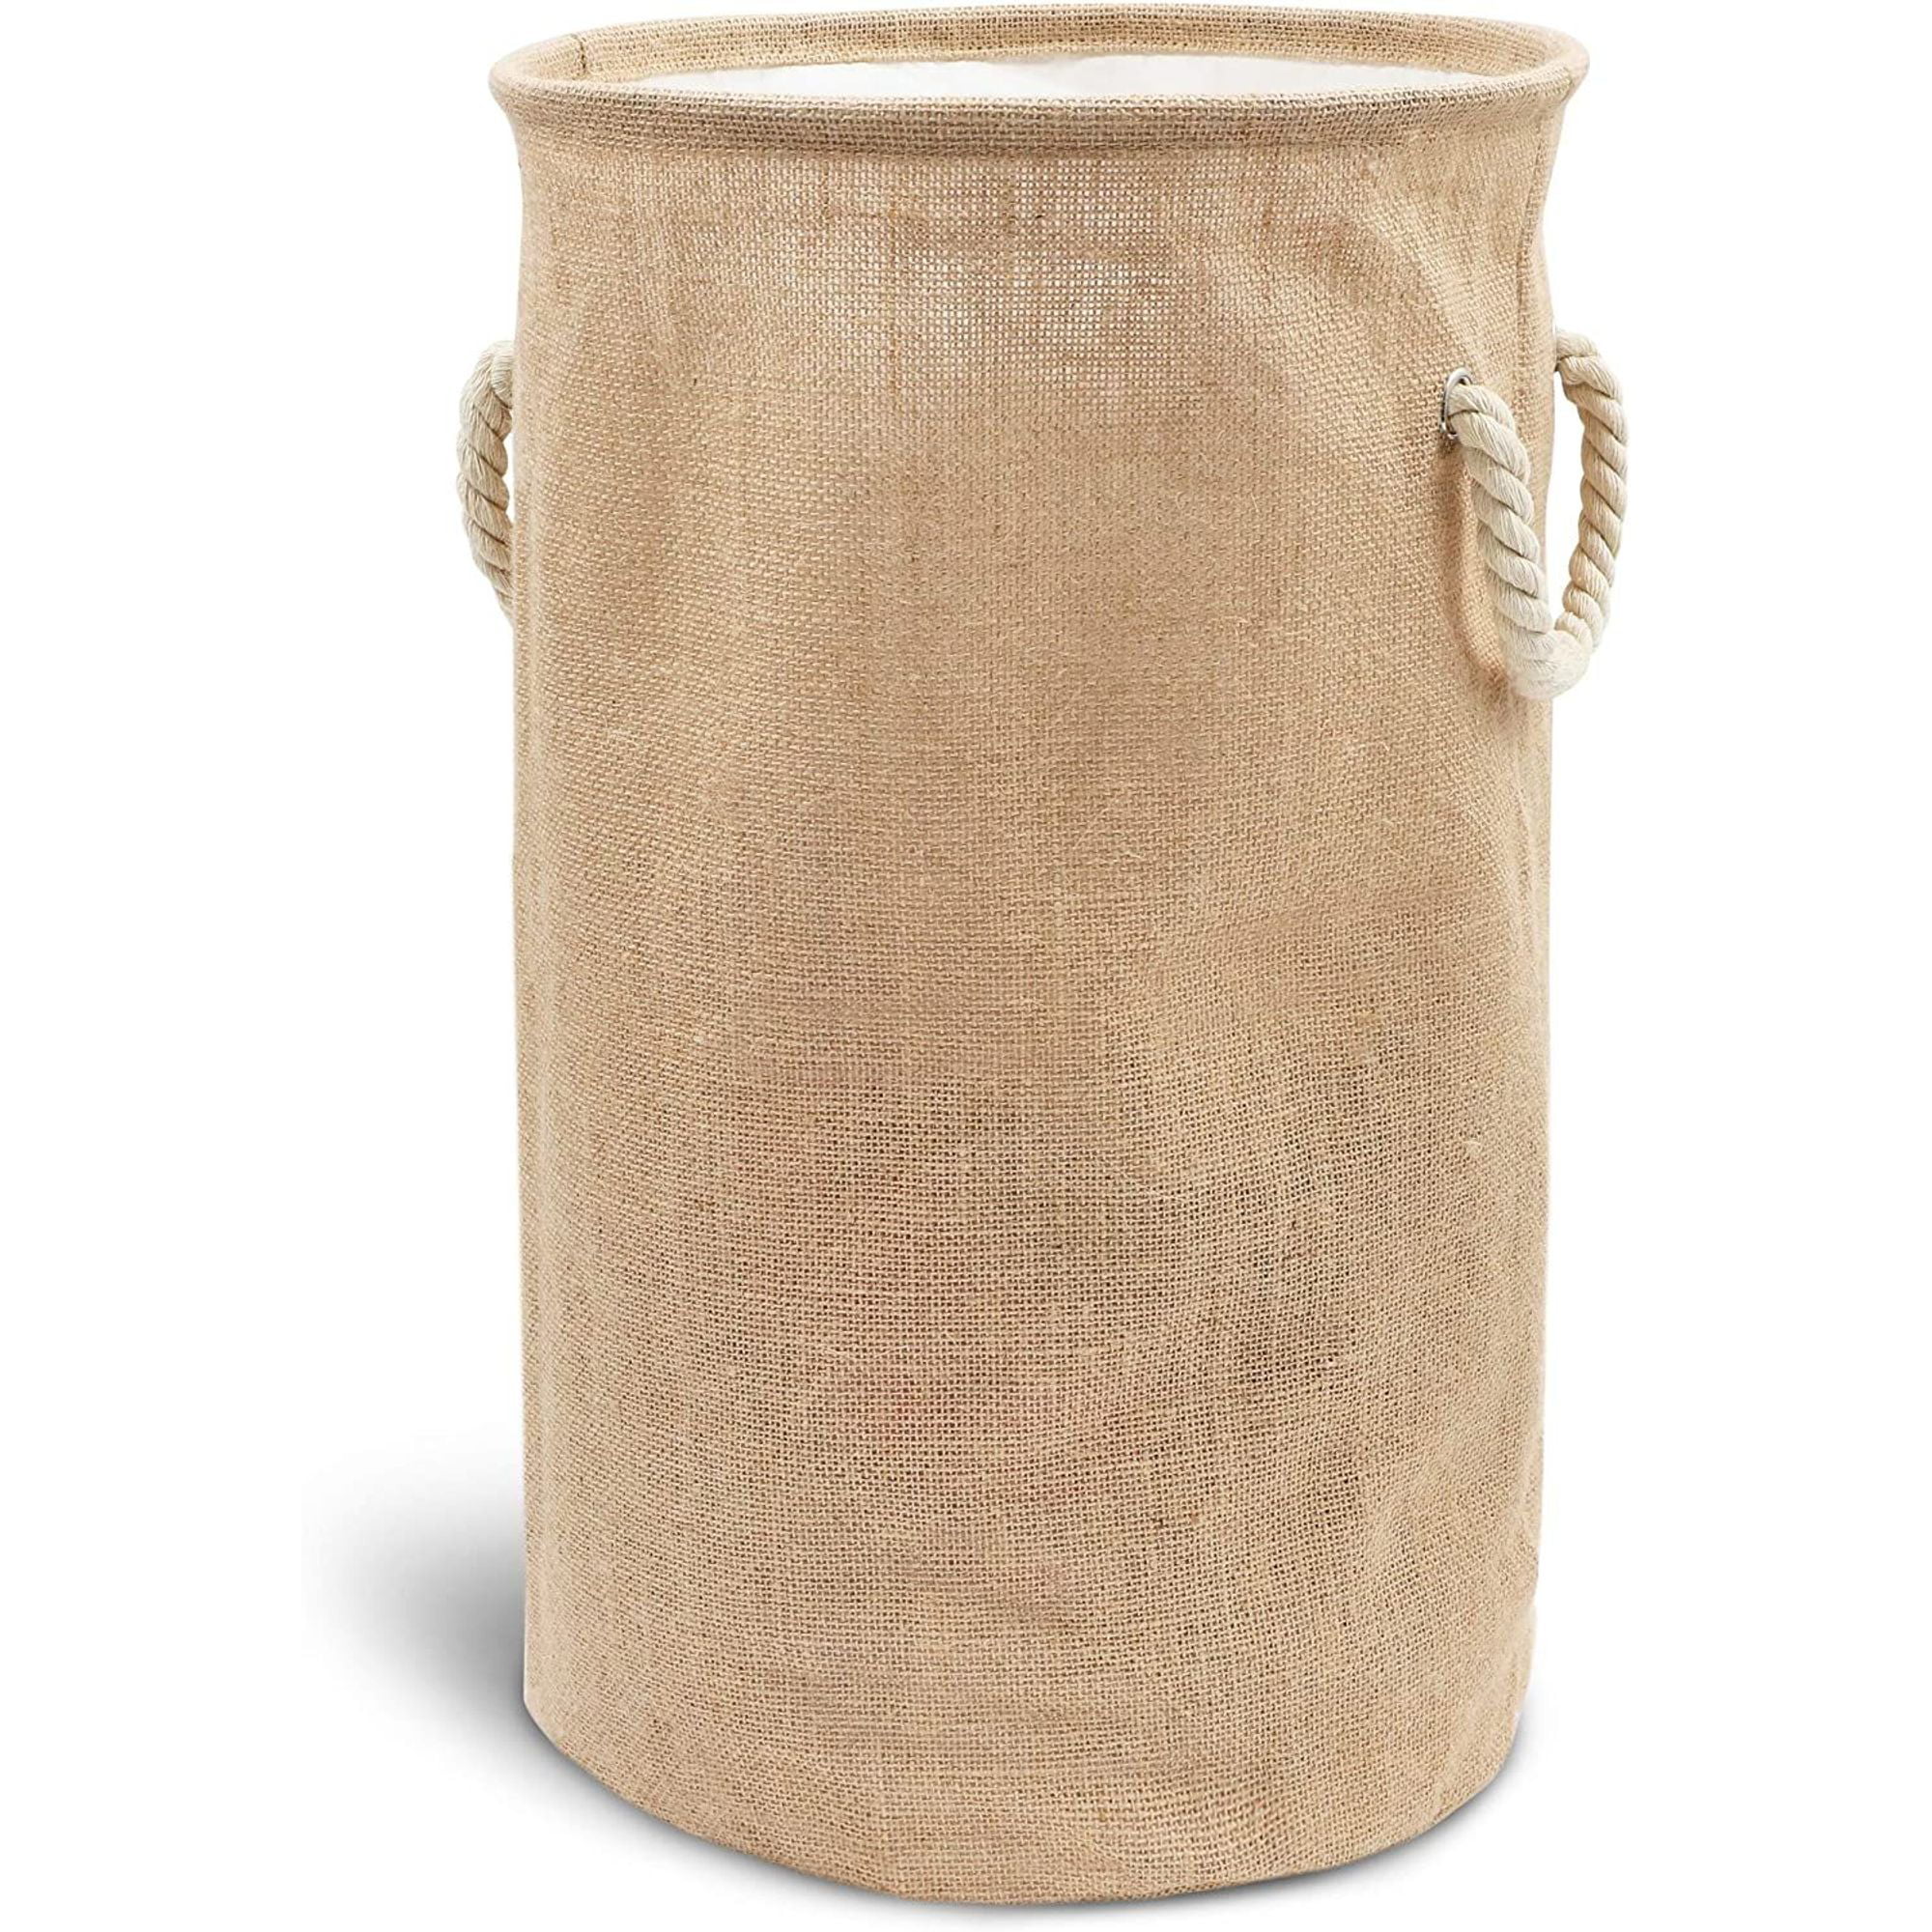 Large Collapsible Woven Jute Fabric, Large Round Laundry Basket